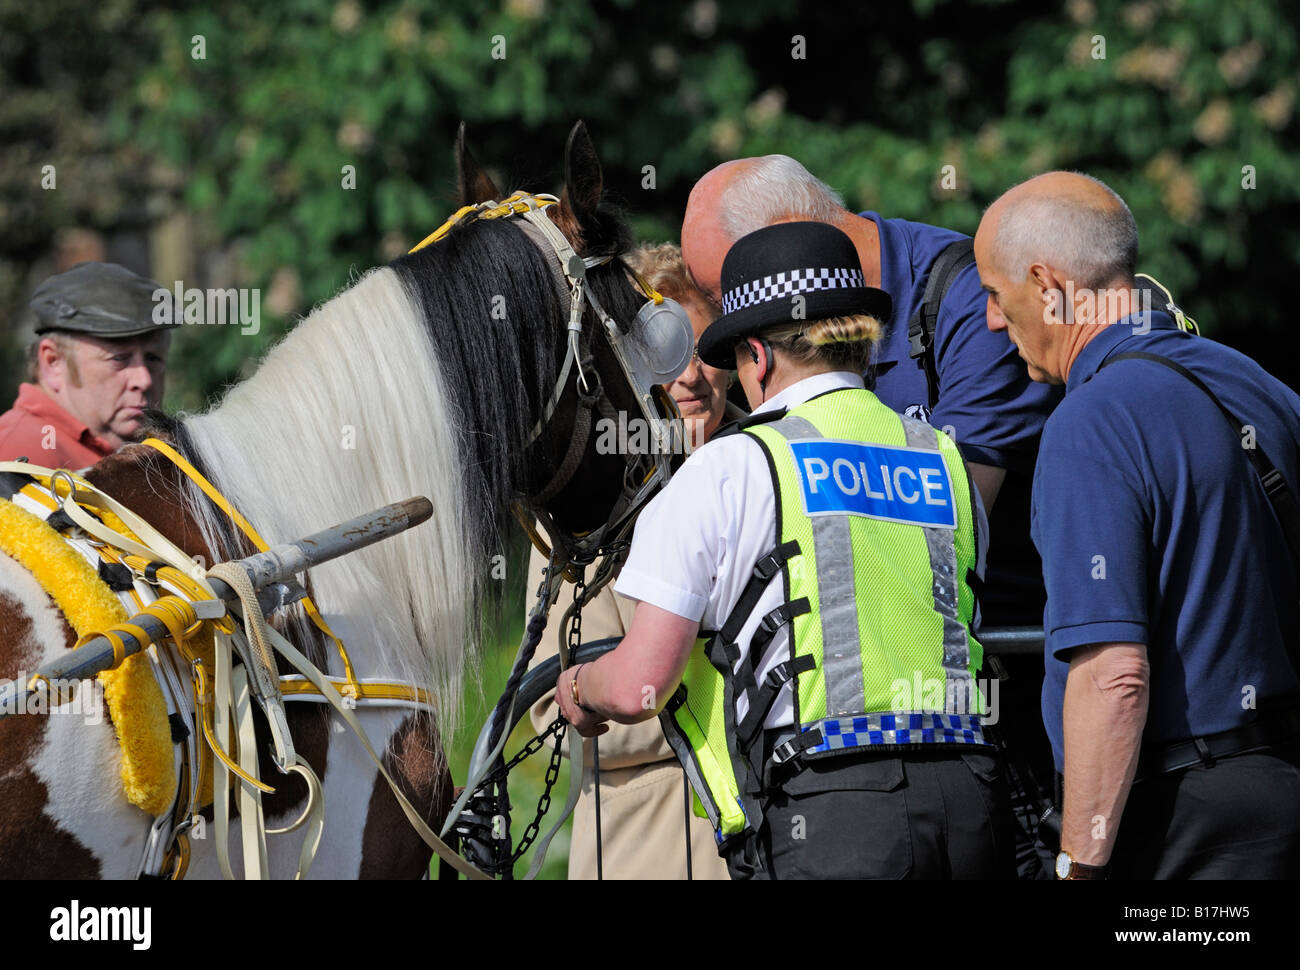 Policewoman to the rescue at Appleby Horse Fair. Appleby-in-Westmorland, Cumbria, England, United Kingdom, Europe. Stock Photo